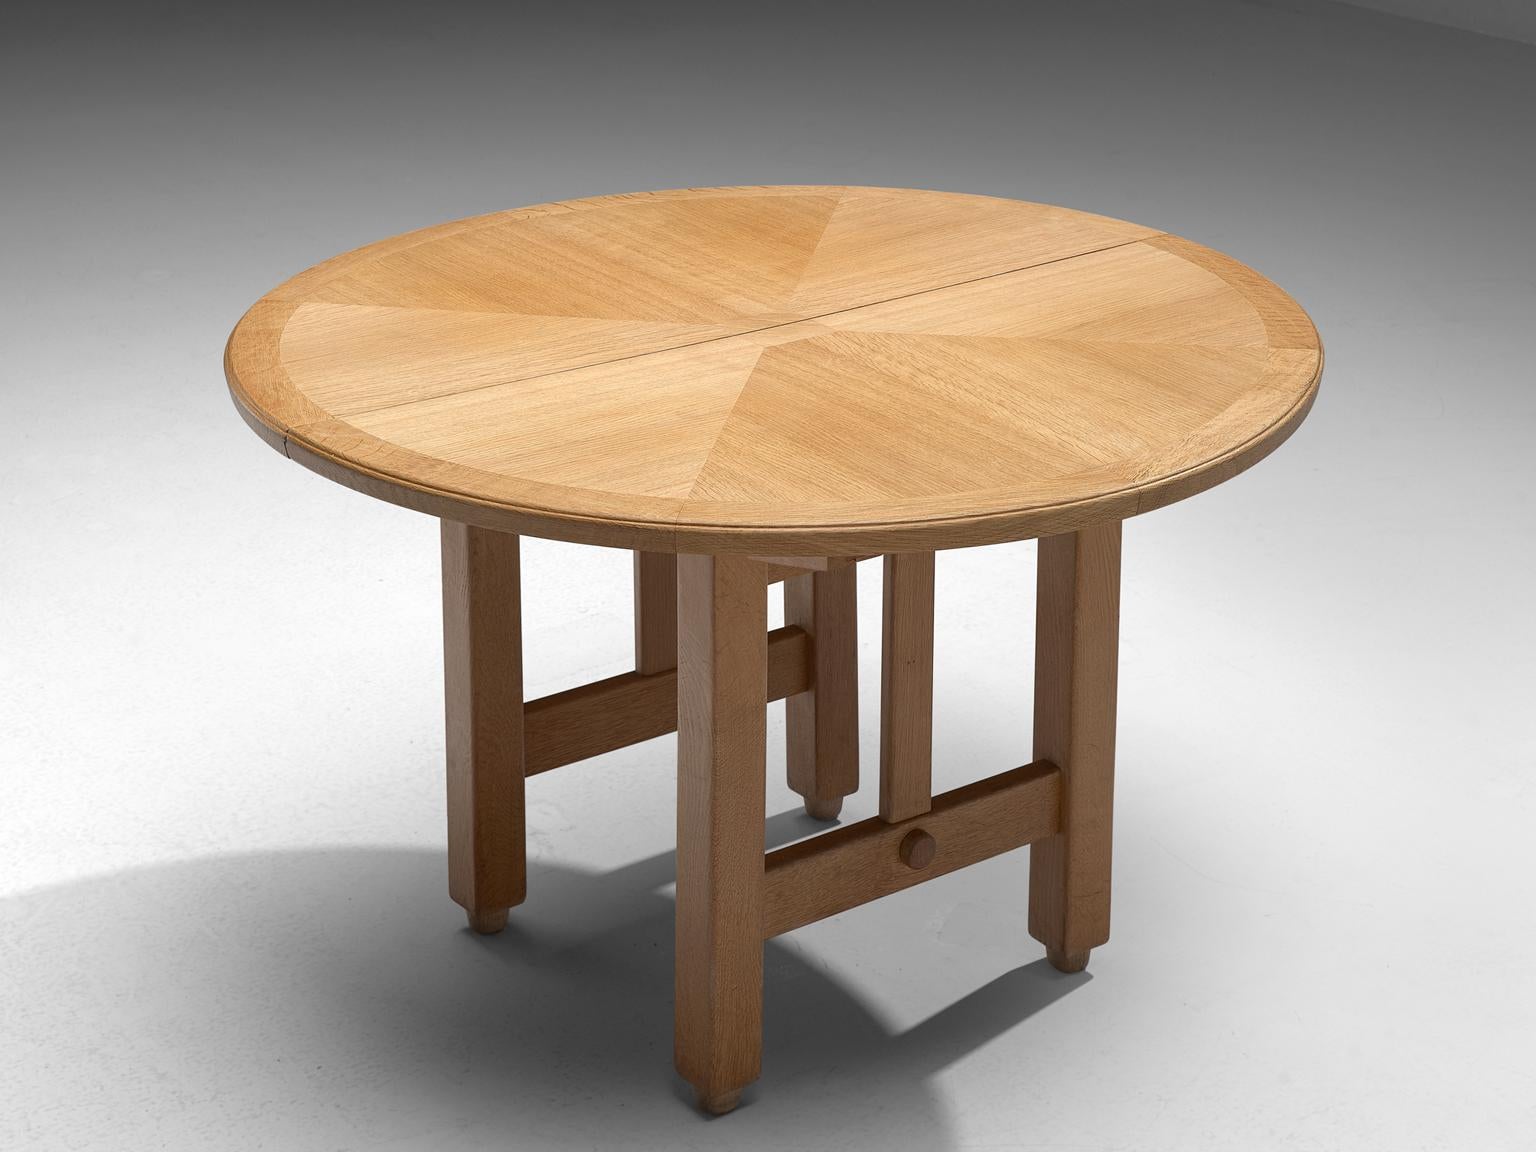 Guillerme et Chambron, extendable dining table, oak, 1960s.

Round shaped dining table with inlayed top. This extendable table in solid oak comes with an optional leaf, which makes it a very versatile item. The sculptural two legged base has the